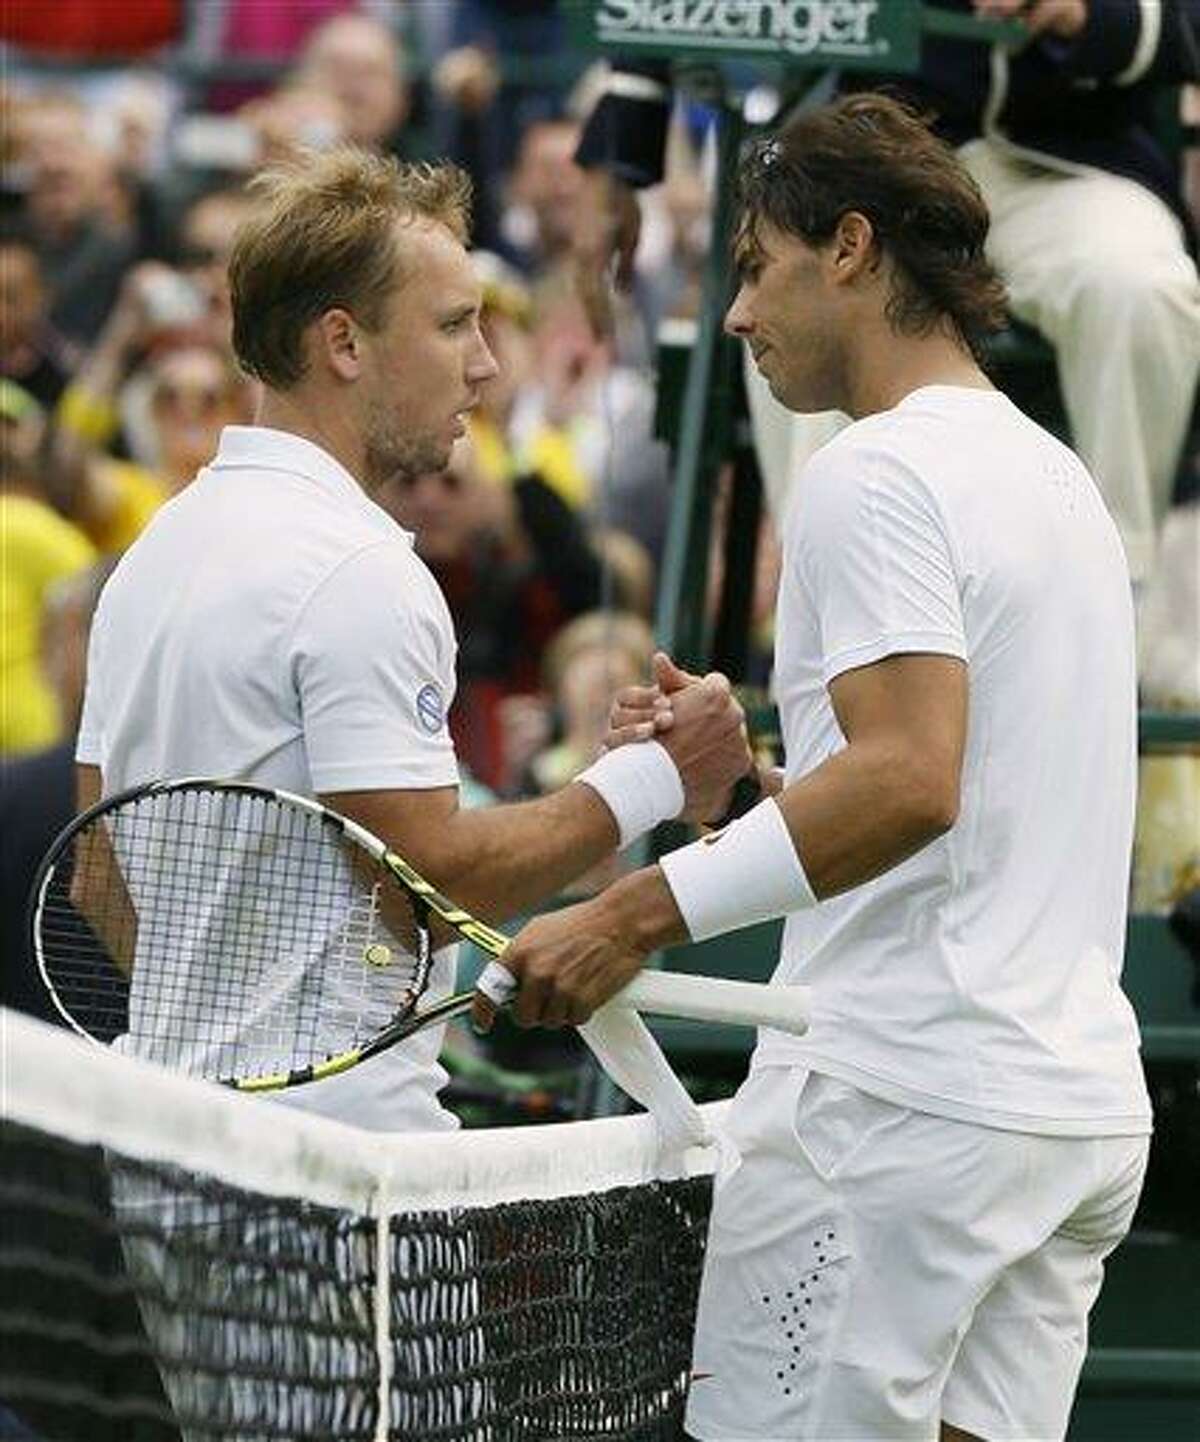 Rafael Nadal of Spain shakes hands with Steve Darcis of Belgium after he lost following their Men's first round singles match at the All England Lawn Tennis Championships in Wimbledon, London, Monday, June 24, 2013. (AP Photo/Kirsty Wigglesworth)